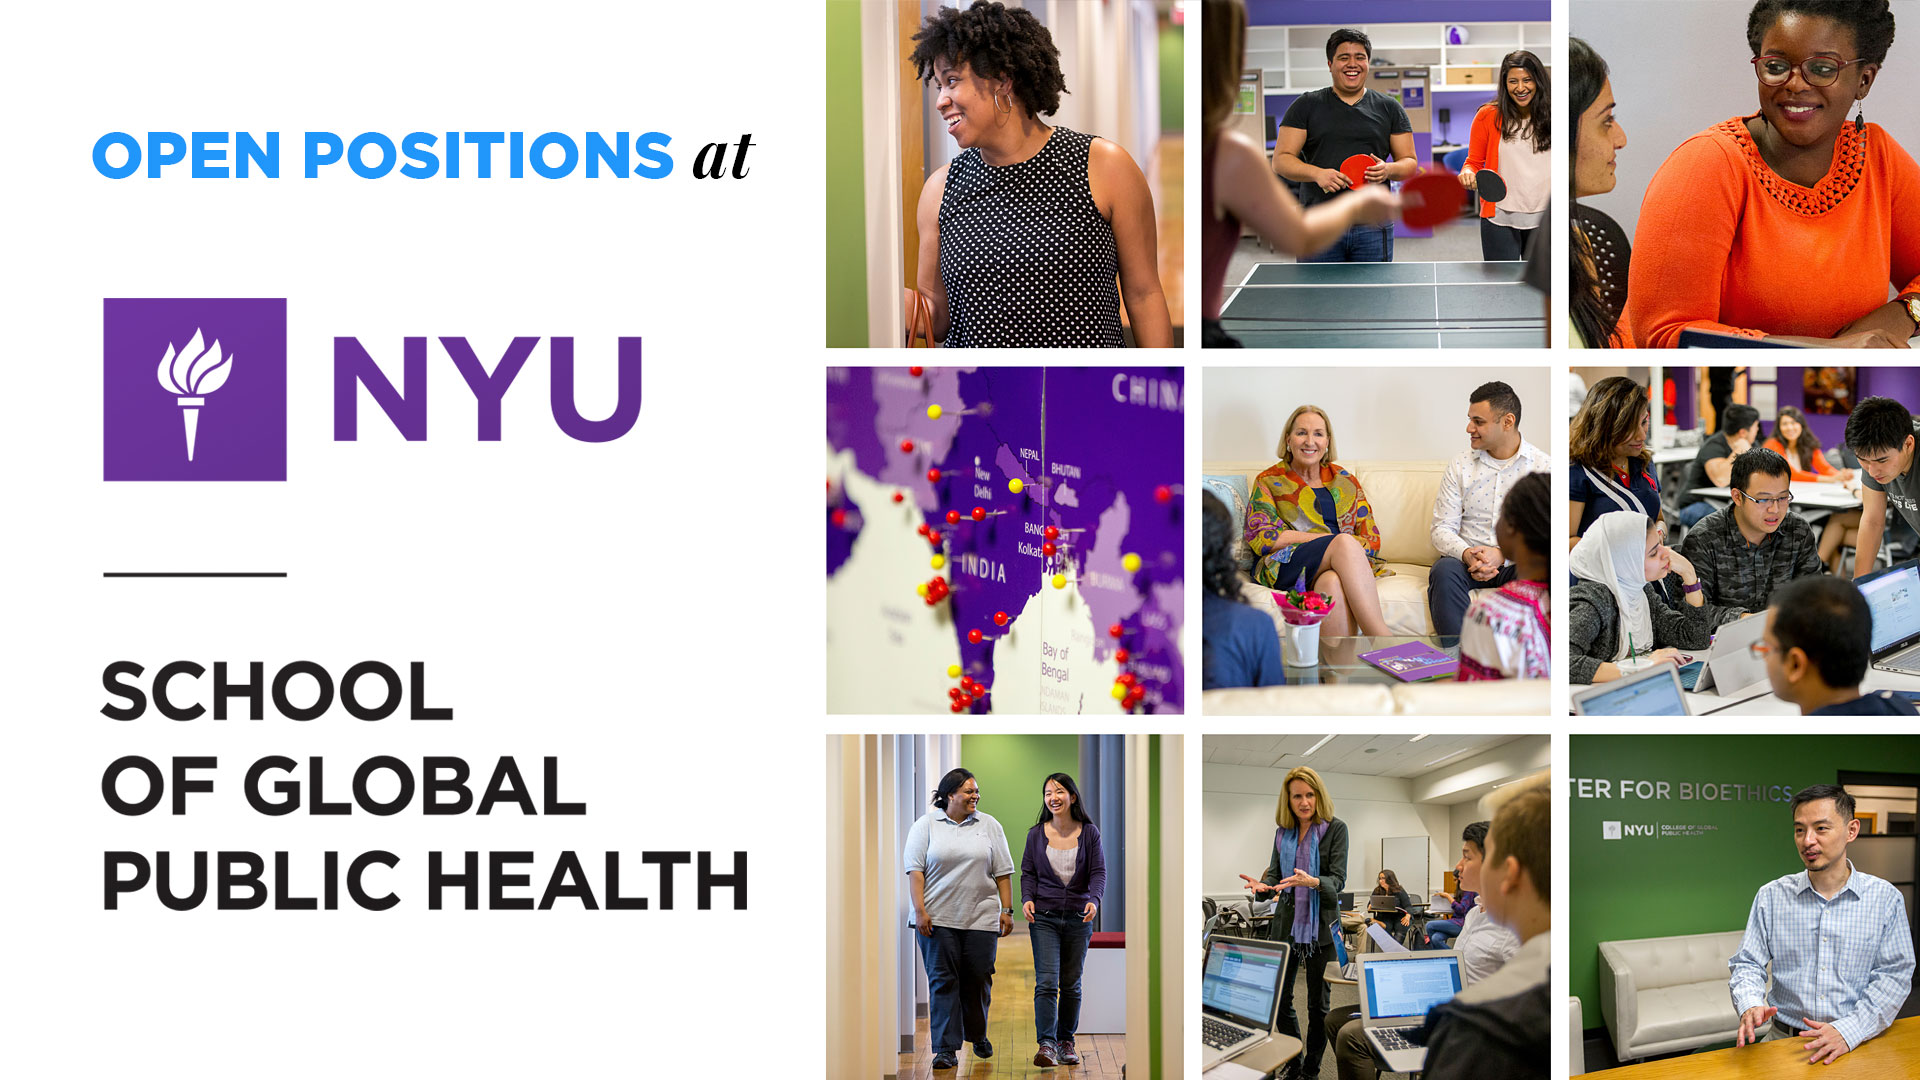 Open Positions at NYU School of Global Public Health